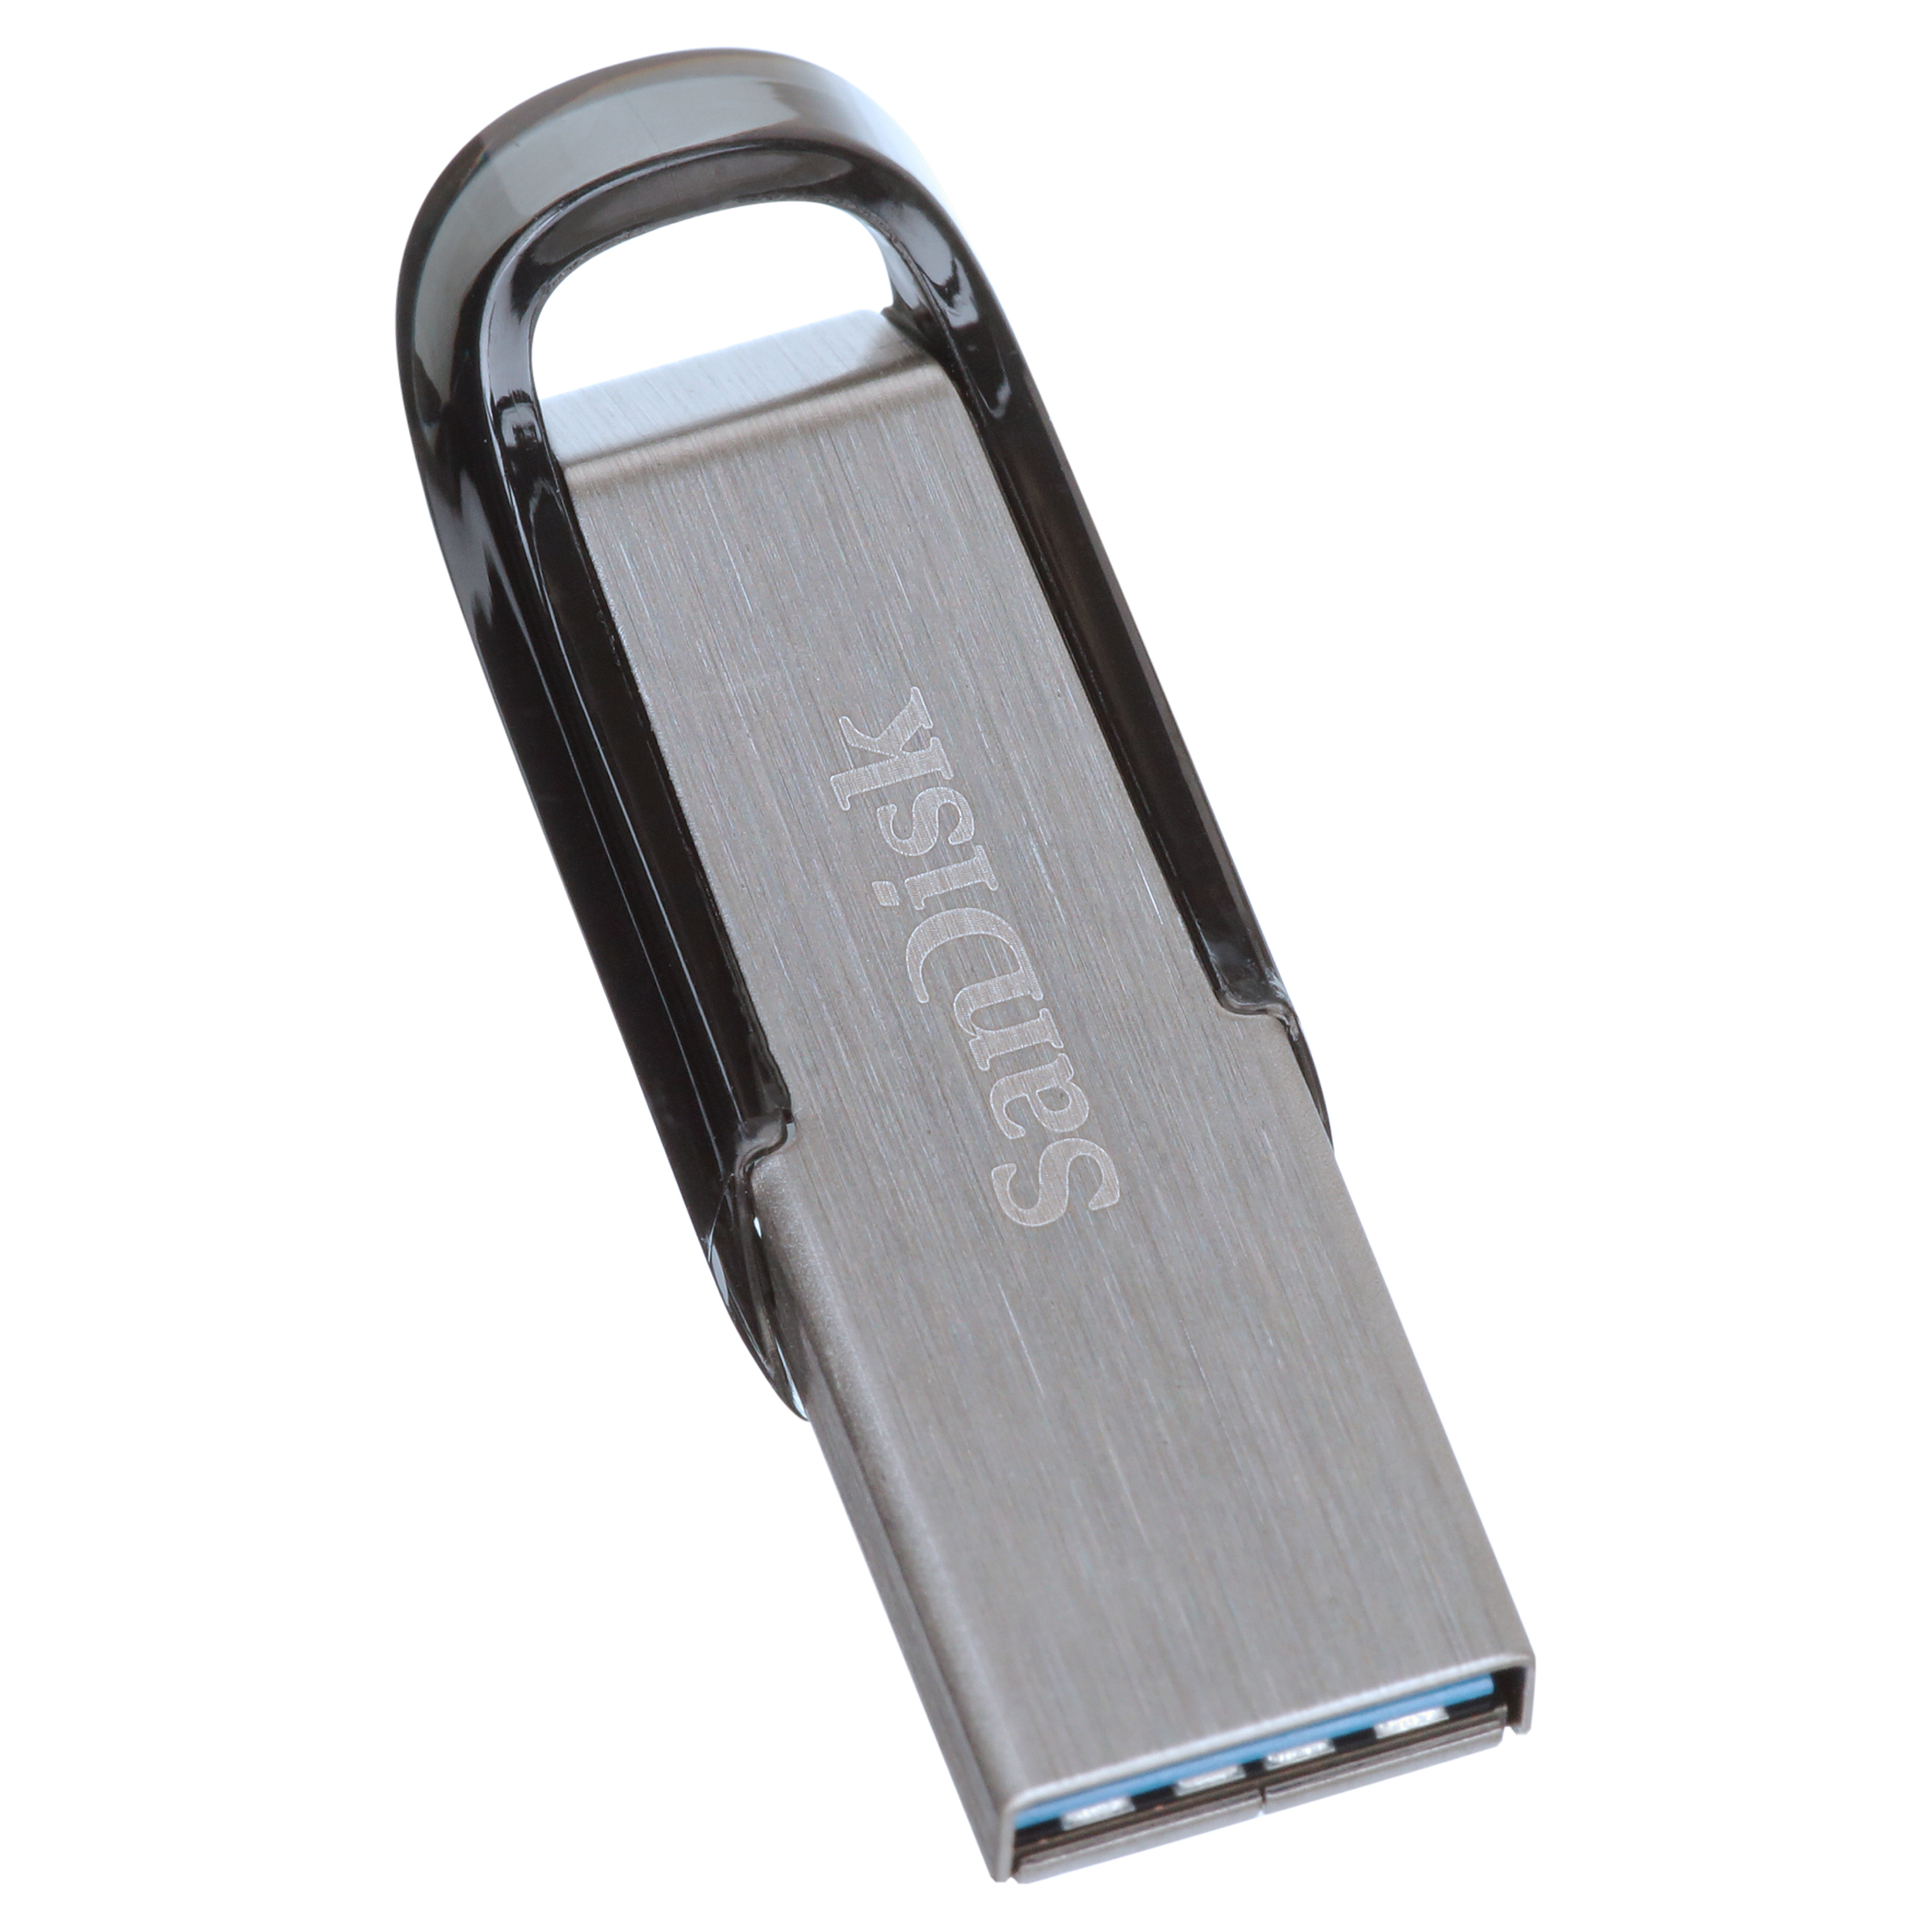 SanDisk 128GB Ultra Flair USB 3.0 Flash Drive - SDCZ73-128G-AW46 - image 3 of 10